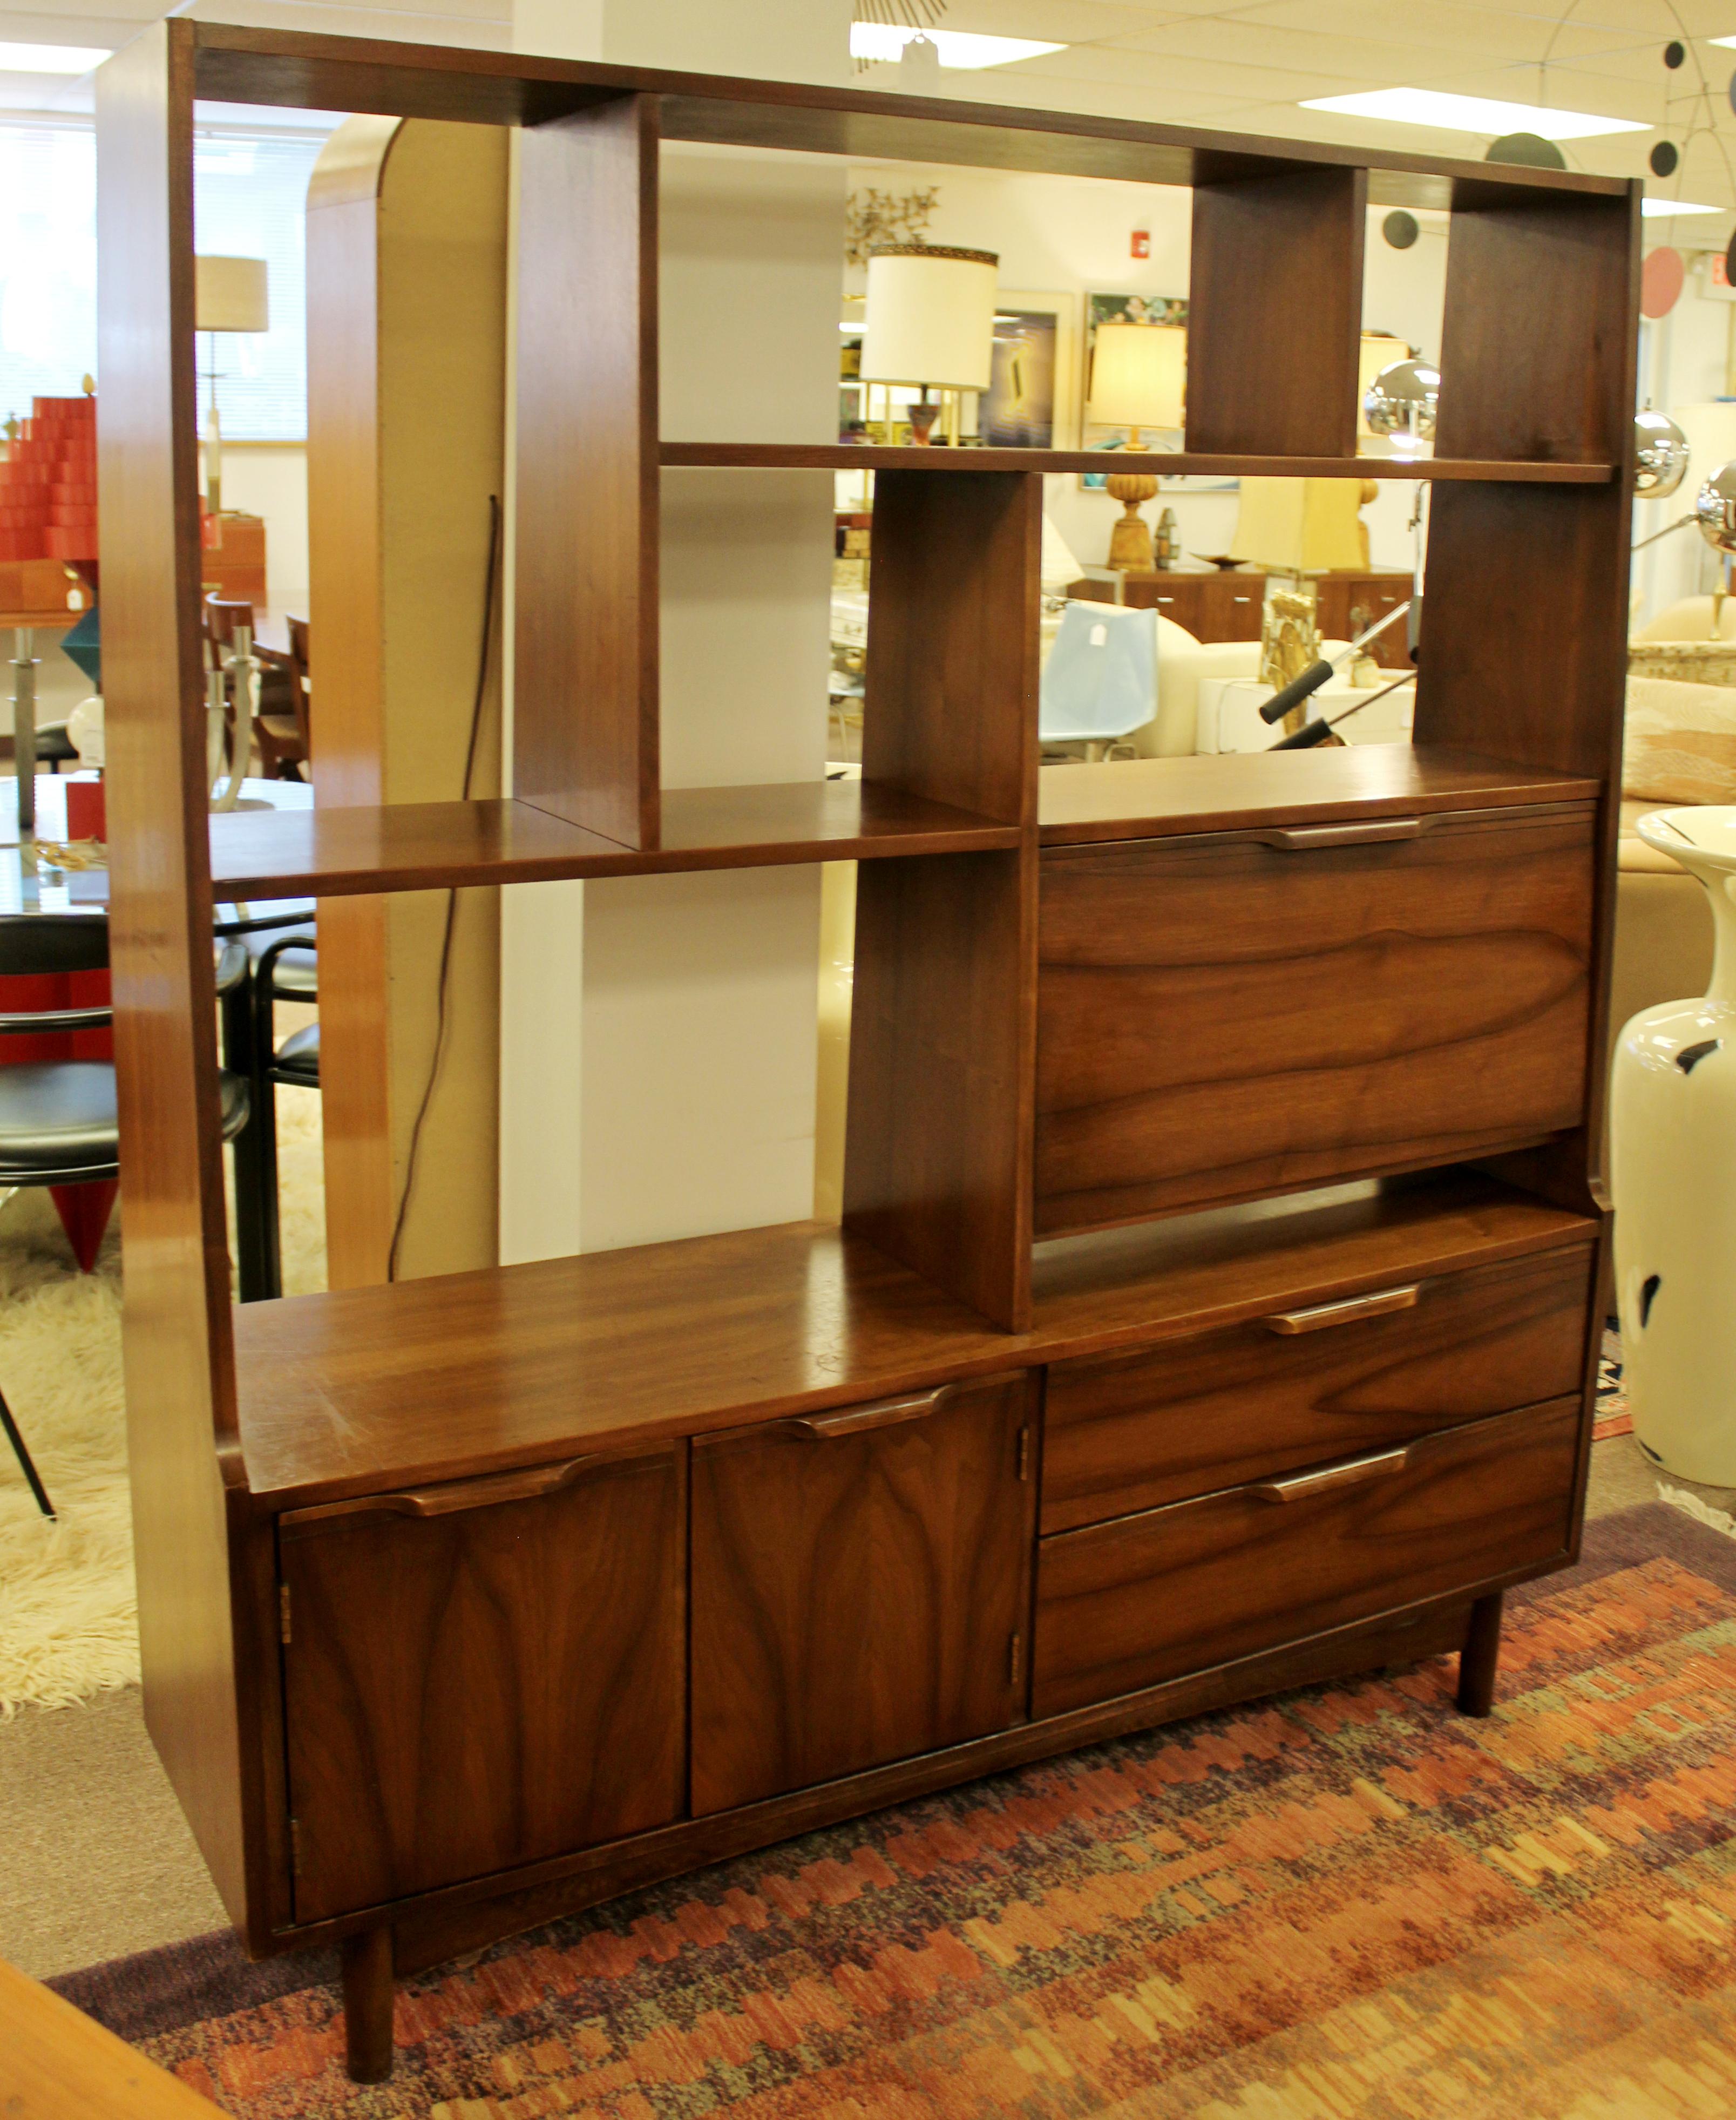 For your consideration is a gorgeous, etagere bookcase, made of walnut, with a drop down desk, circa the 1950s. In excellent condition. The dimensions are 60